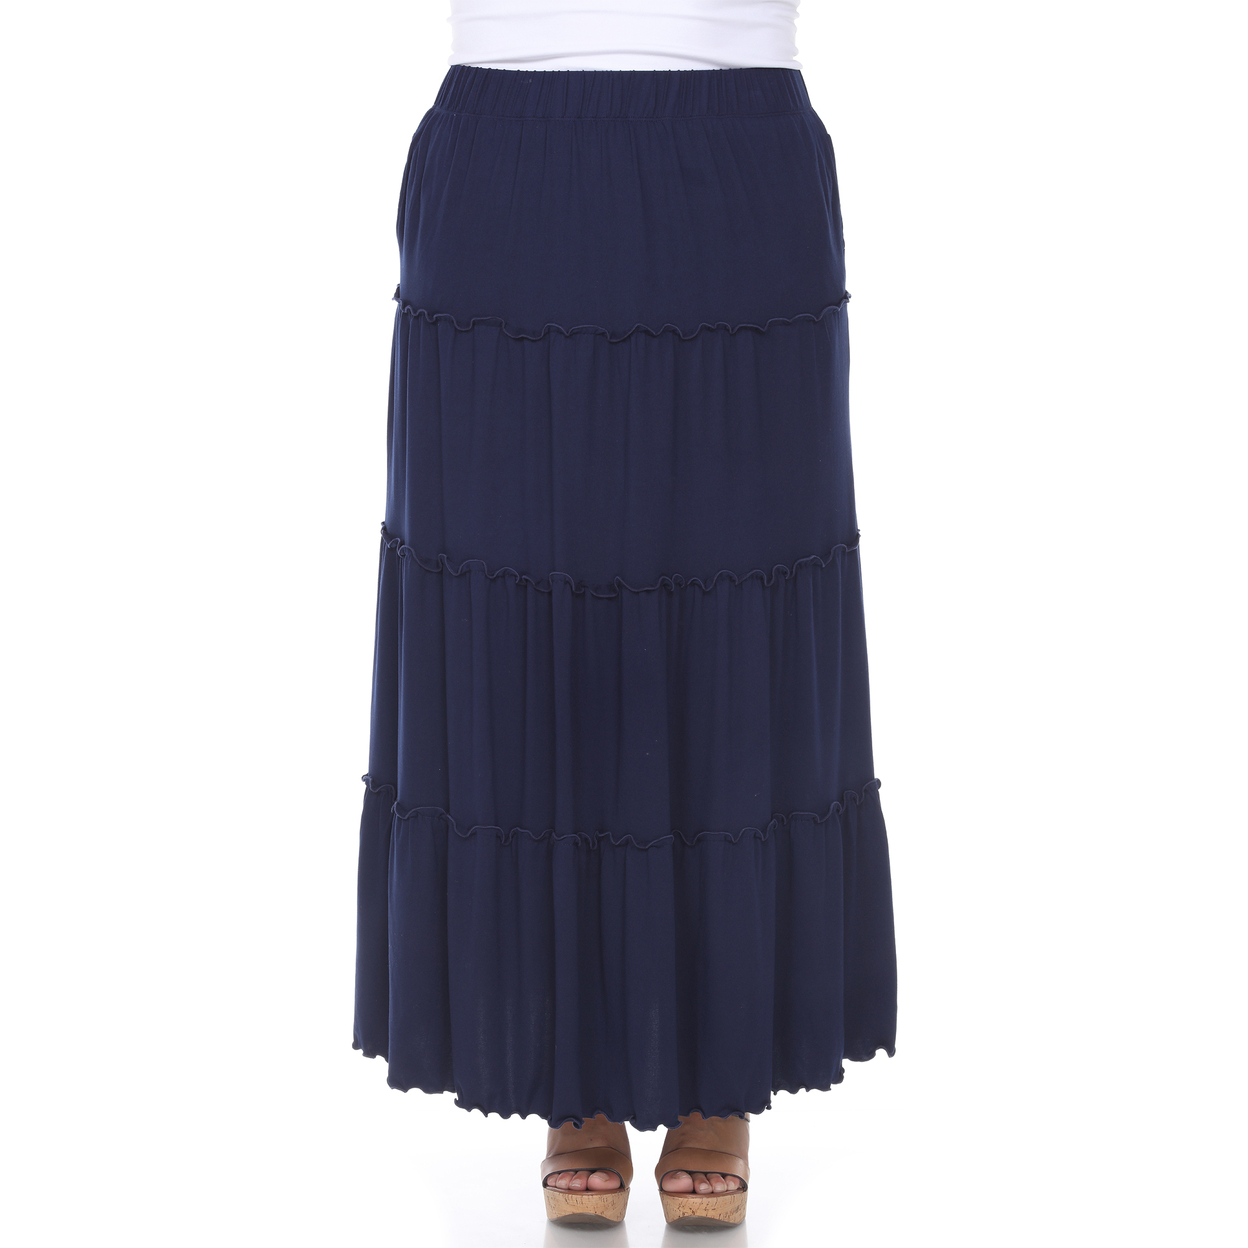 White Mark Women's Plus Size Tiered Maxi Skirt With Pockets - Denim Blue, 3x